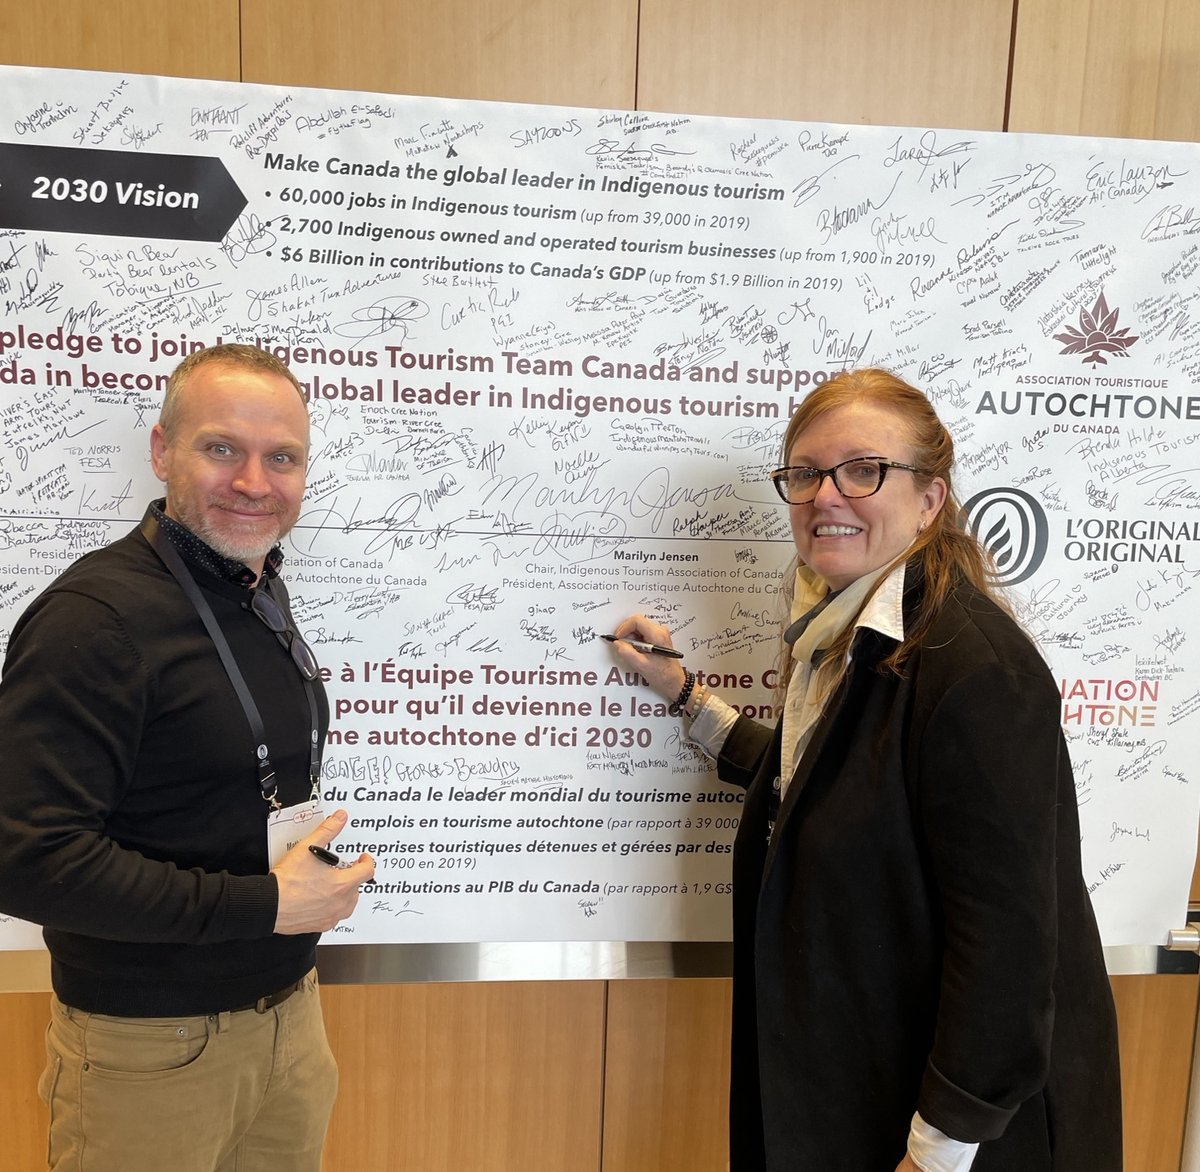 @matdeking, VP, Chief Trails Experience, and @EMcMahon_TCT, our Président and CEO, recently attended #IITC2023 in Winnipeg, where they signed the pledge to make Canada a global leader in Indigenous tourism!
#IndigenousTourismTeamCanada